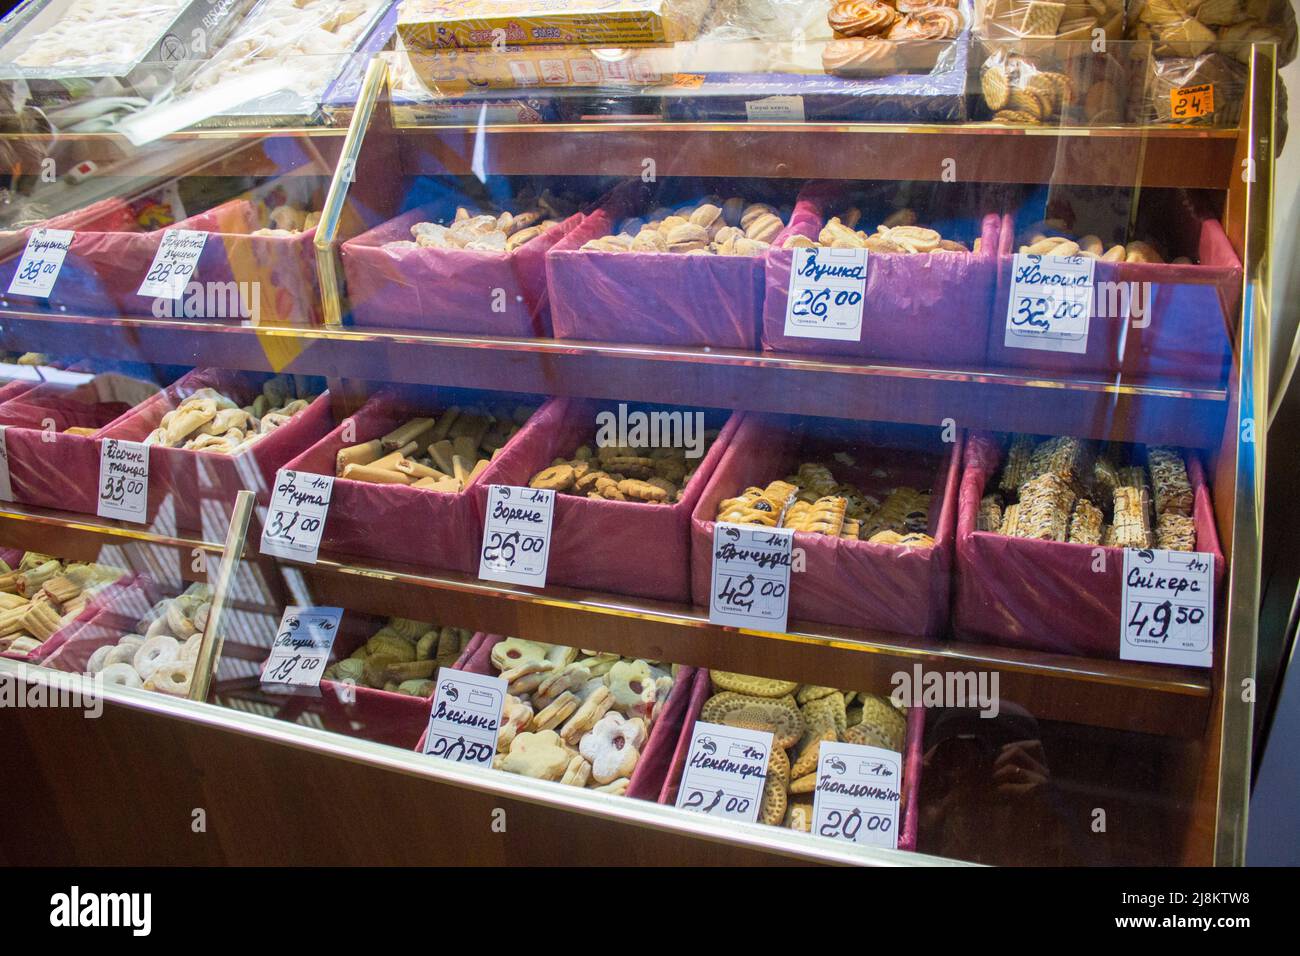 on shelves showcase sell cookies to prices in Ukraine Stock Photo